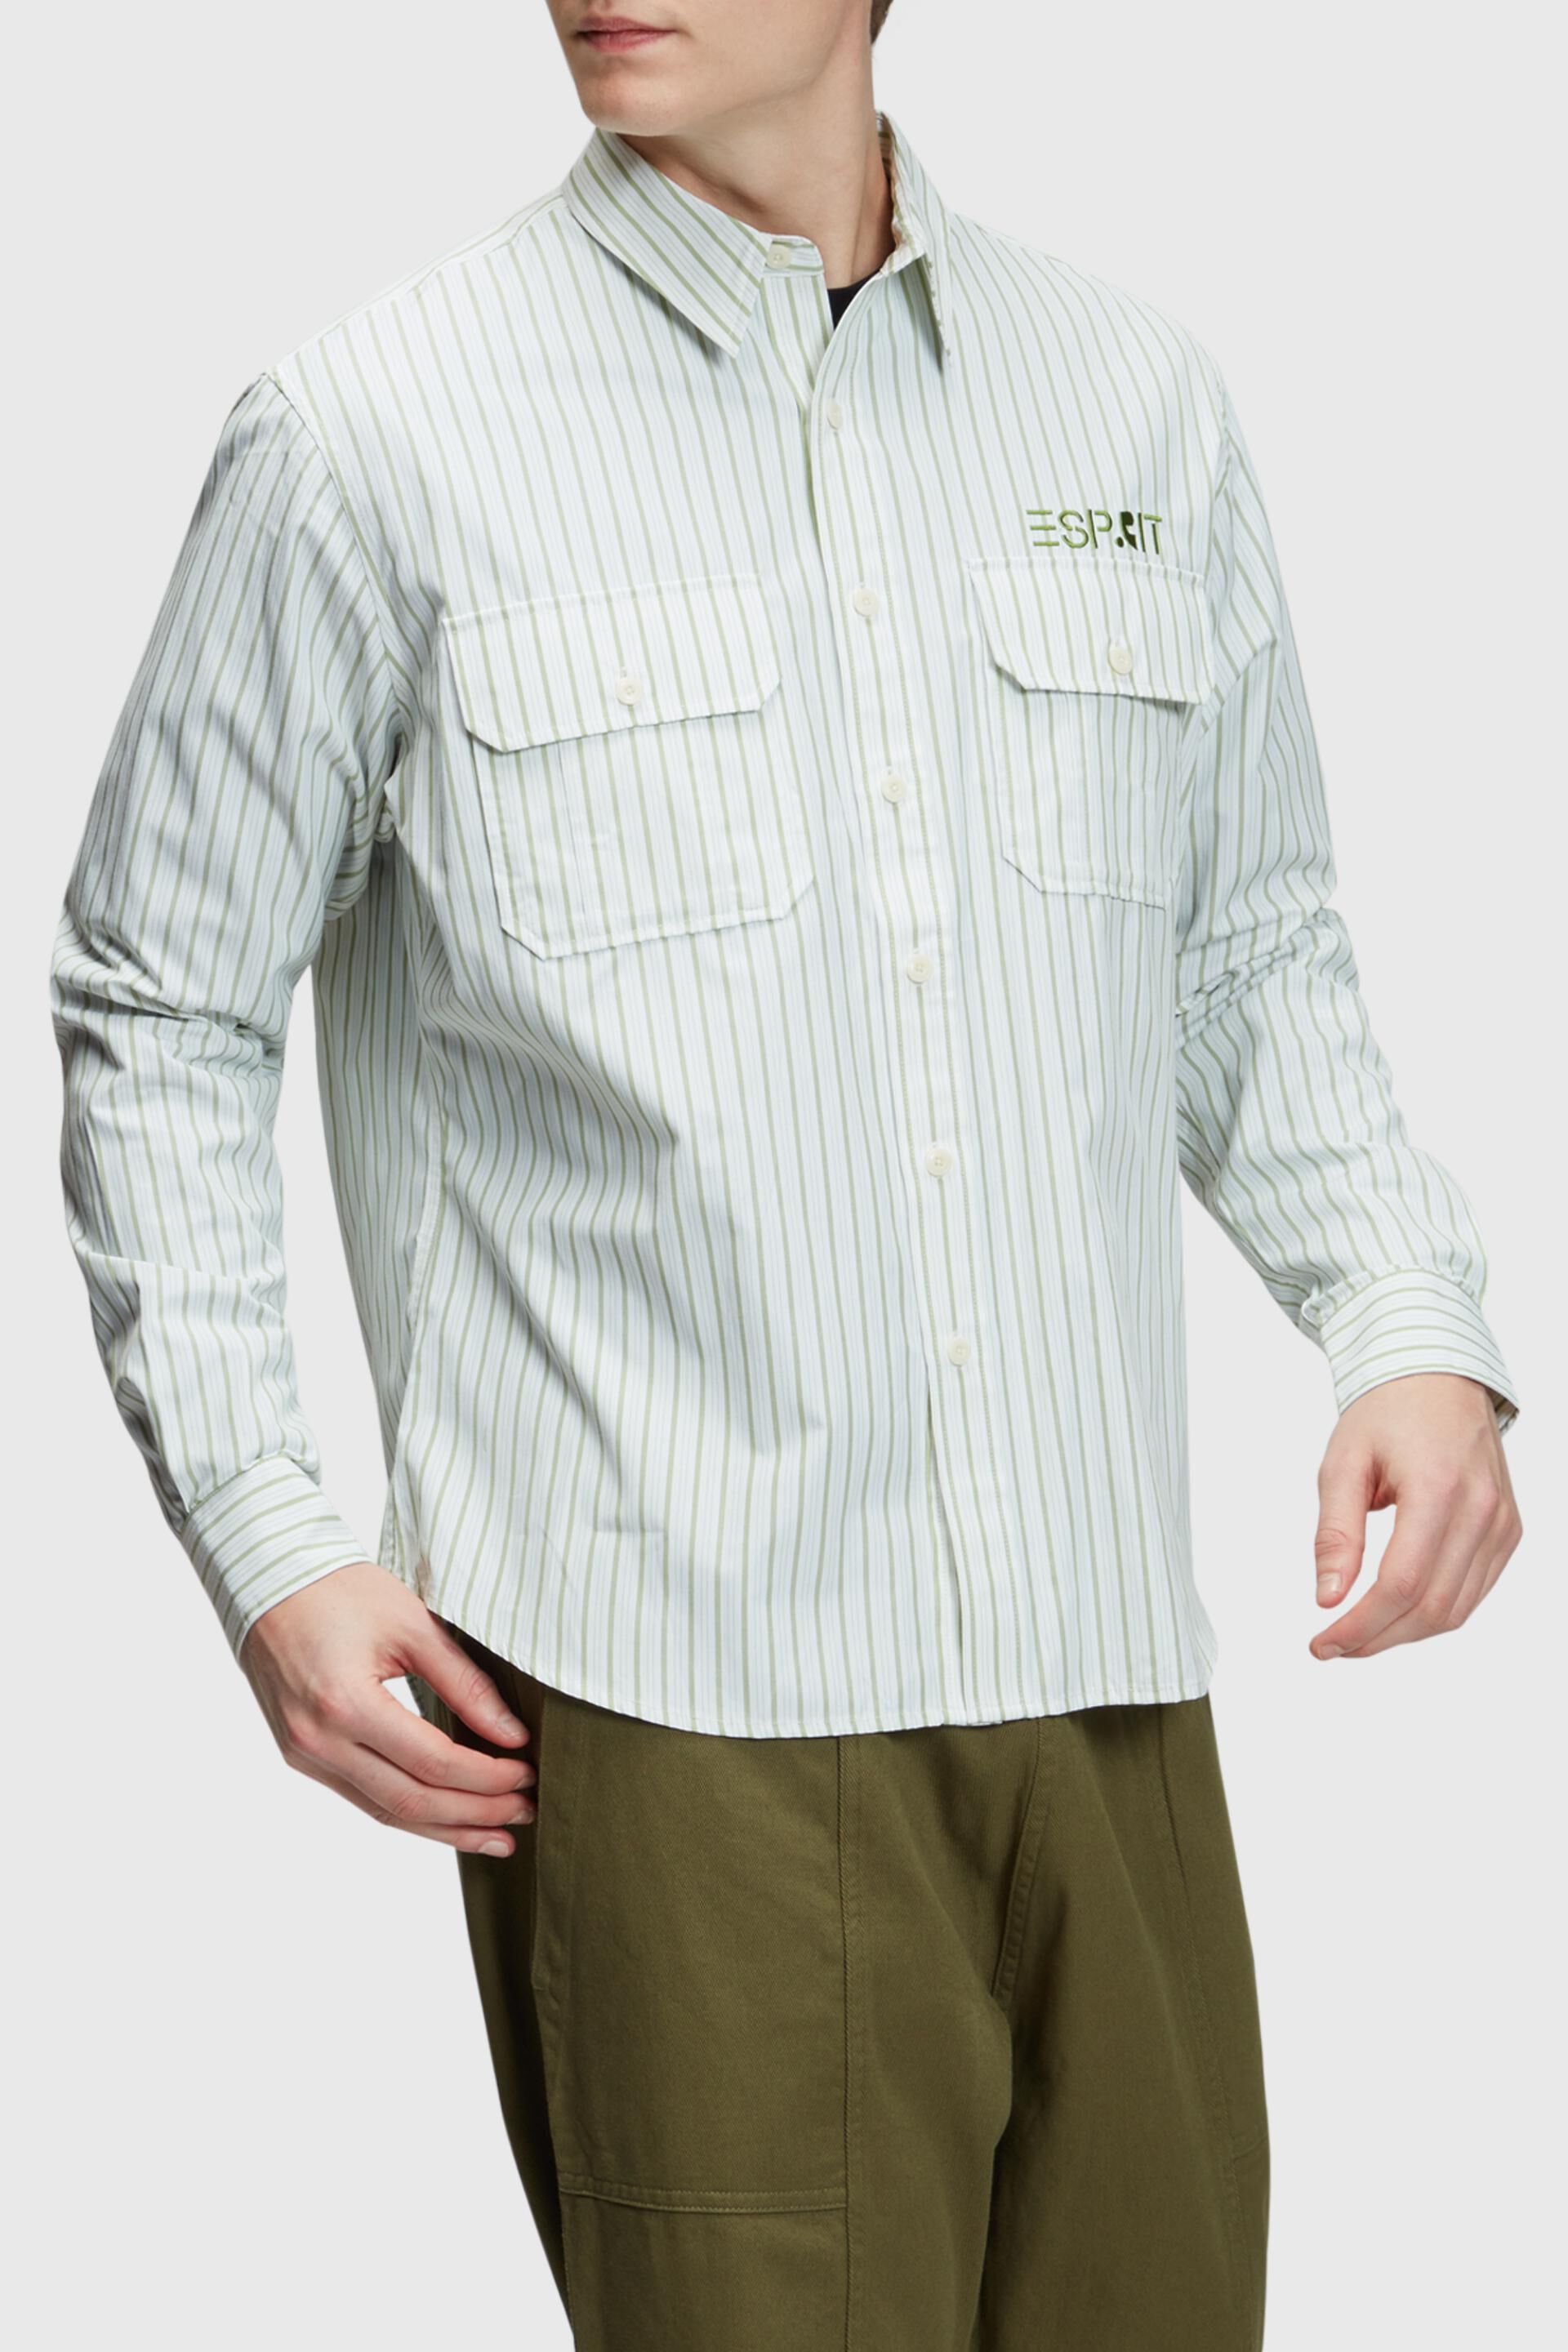 Esprit striped Relaxed fit shirt